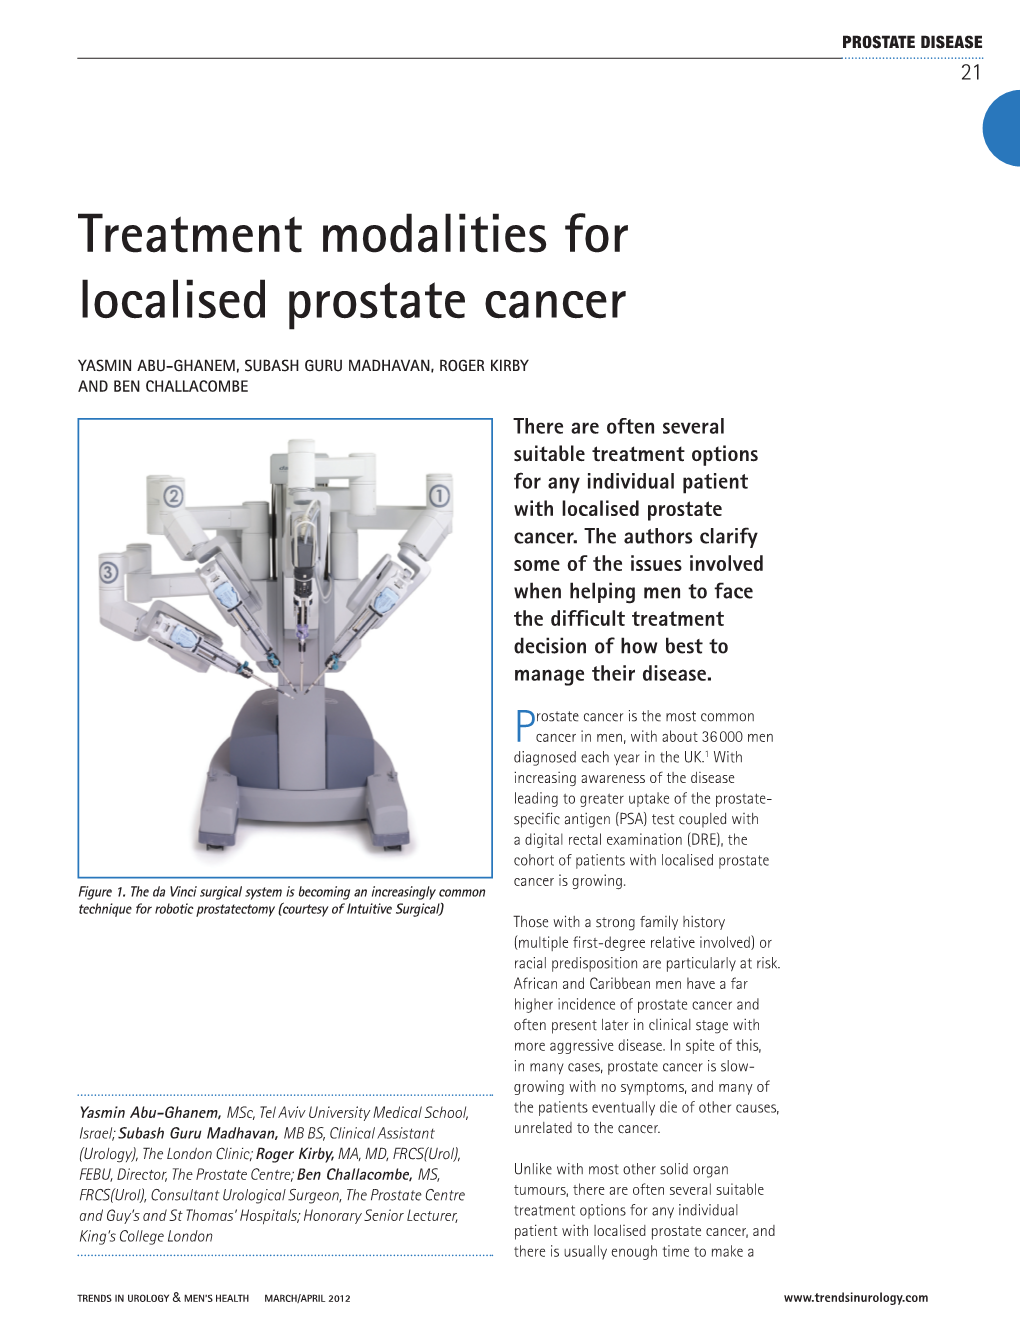 Treatment Modalities for Localised Prostate Cancer